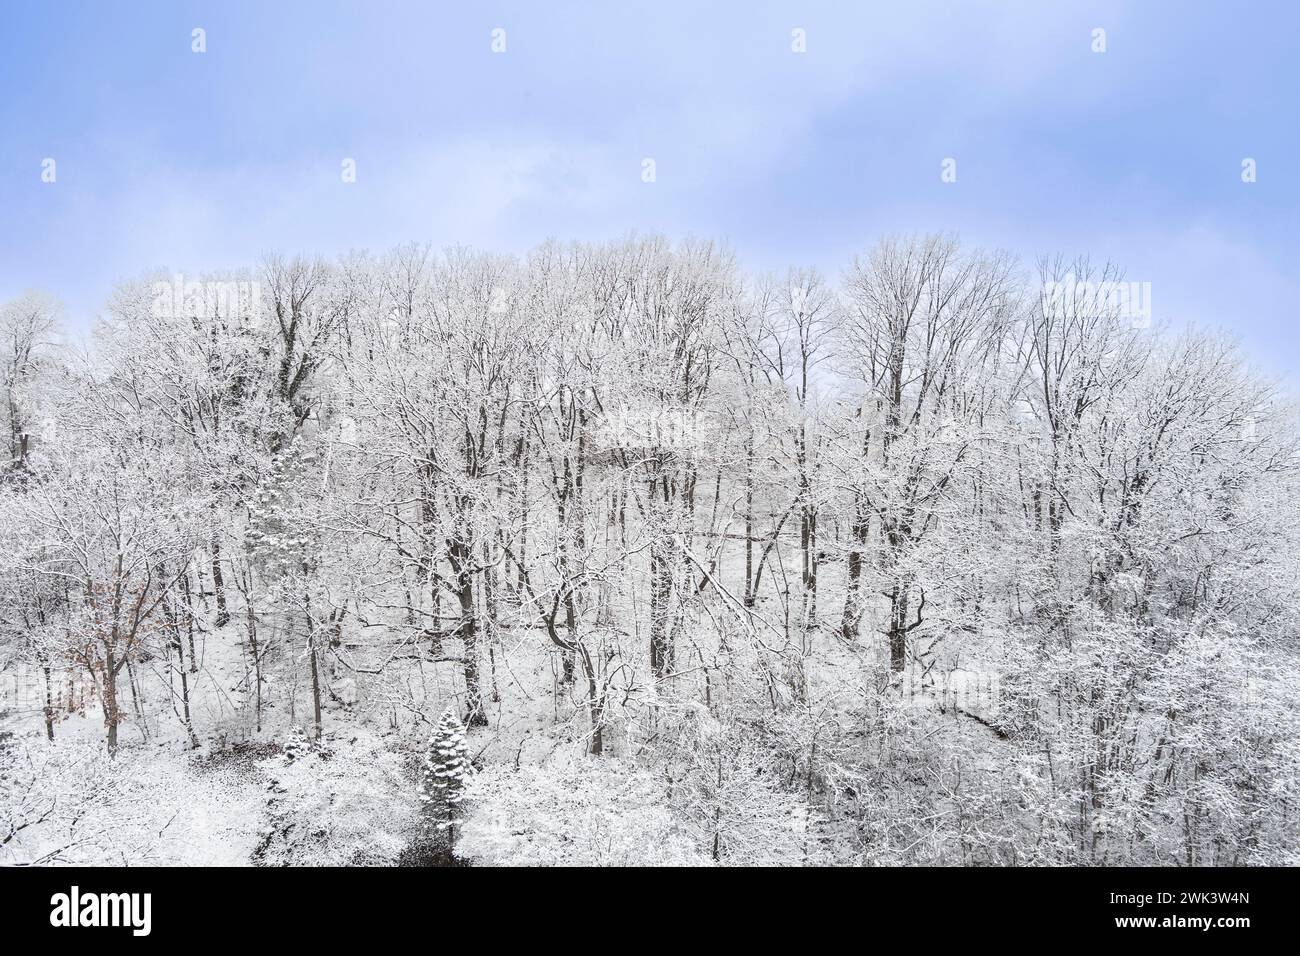 Aerial view of hill with snow covered trees in winter, Pennsylvania, USA Stock Photo